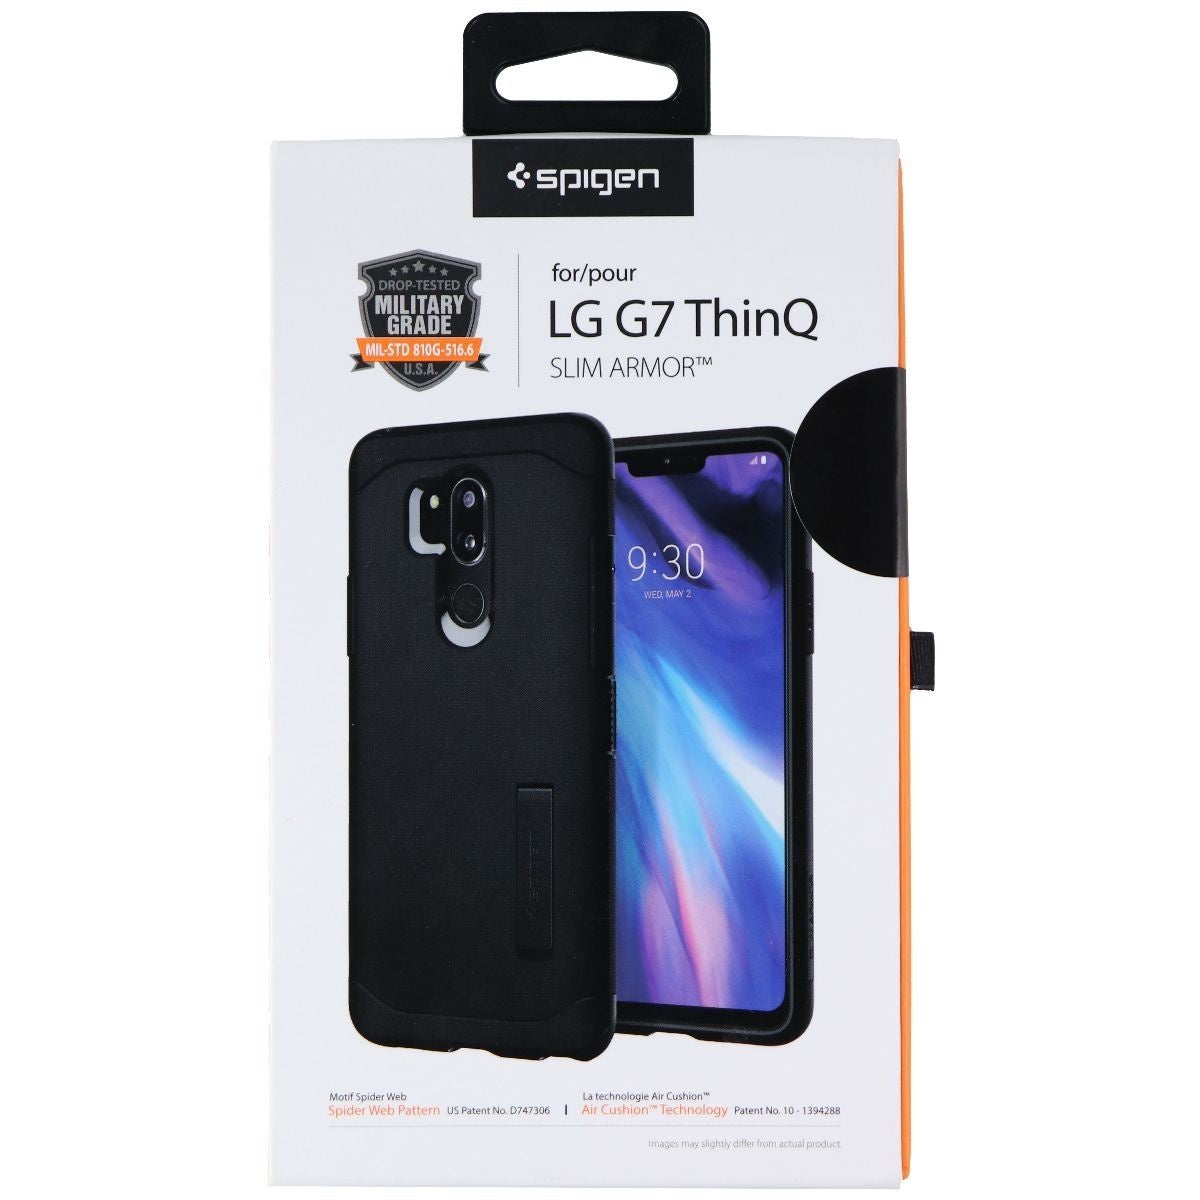 Spigen Slim Armor Case with Kickstand for LG G7 ThinQ - Black Cell Phone - Cases, Covers & Skins Spigen    - Simple Cell Bulk Wholesale Pricing - USA Seller